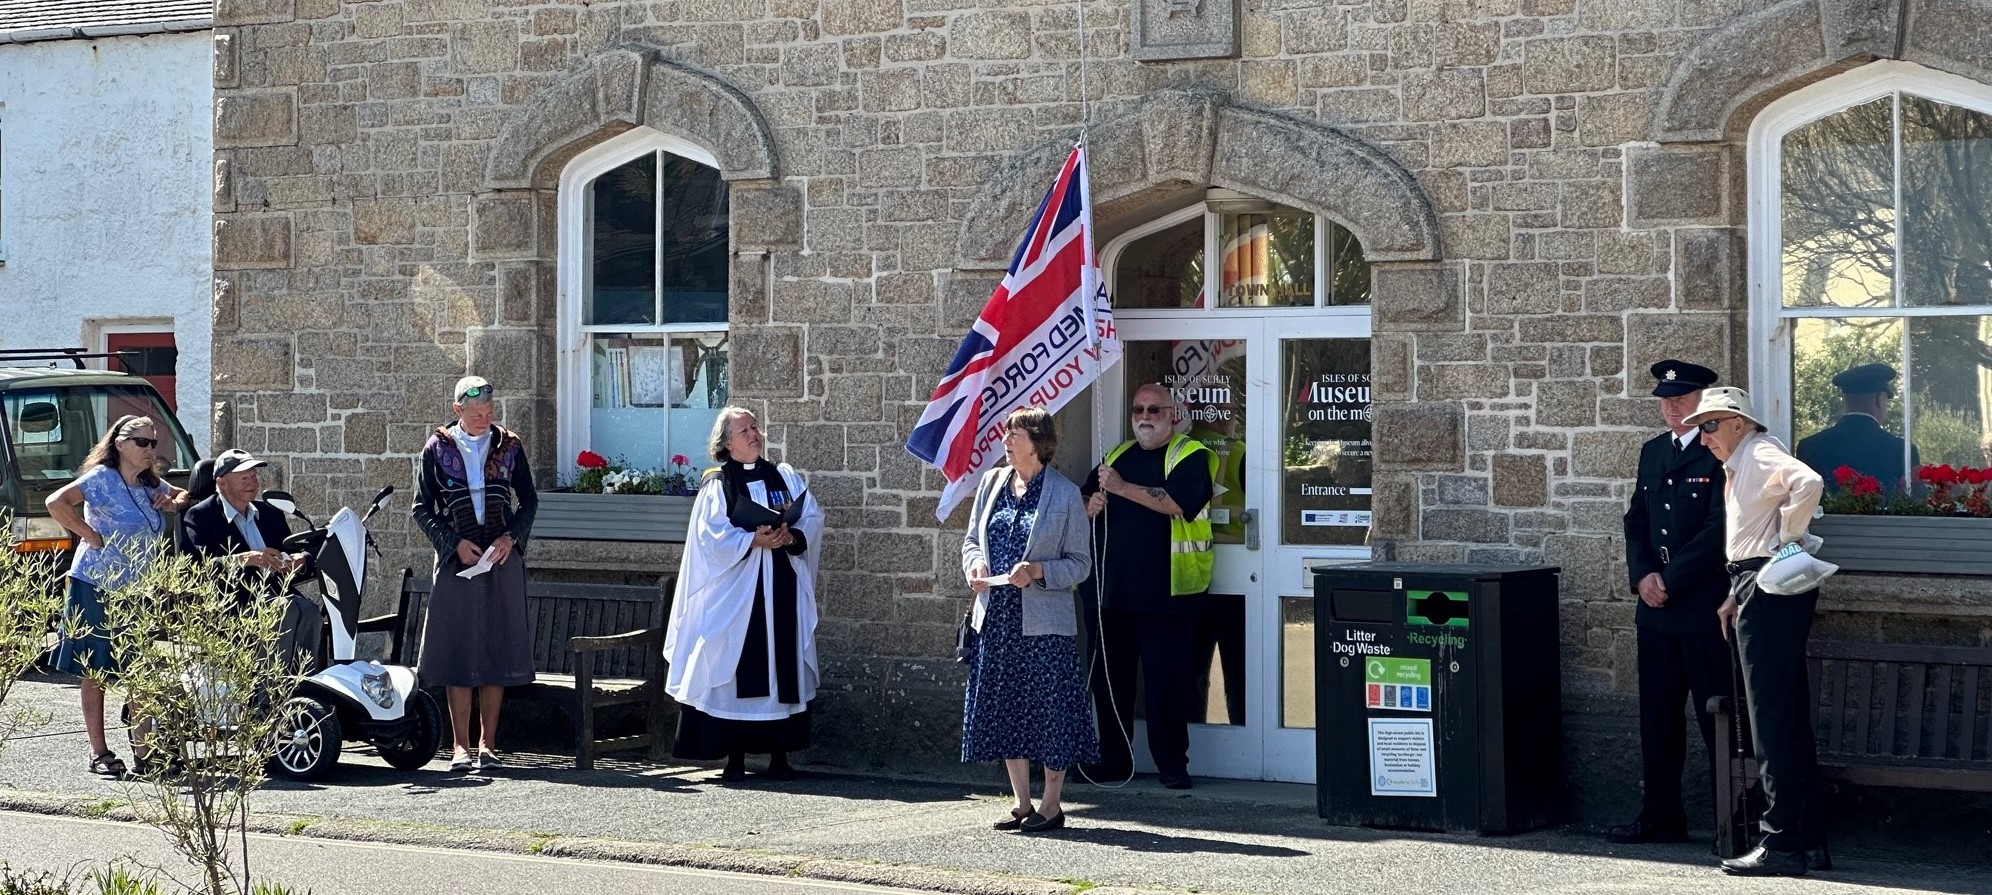 Image of Vice Chairman of Council, Cllr Frances Grottick, speaking at the Armed Forces Day flag raising ceremony outside of the Town Hall